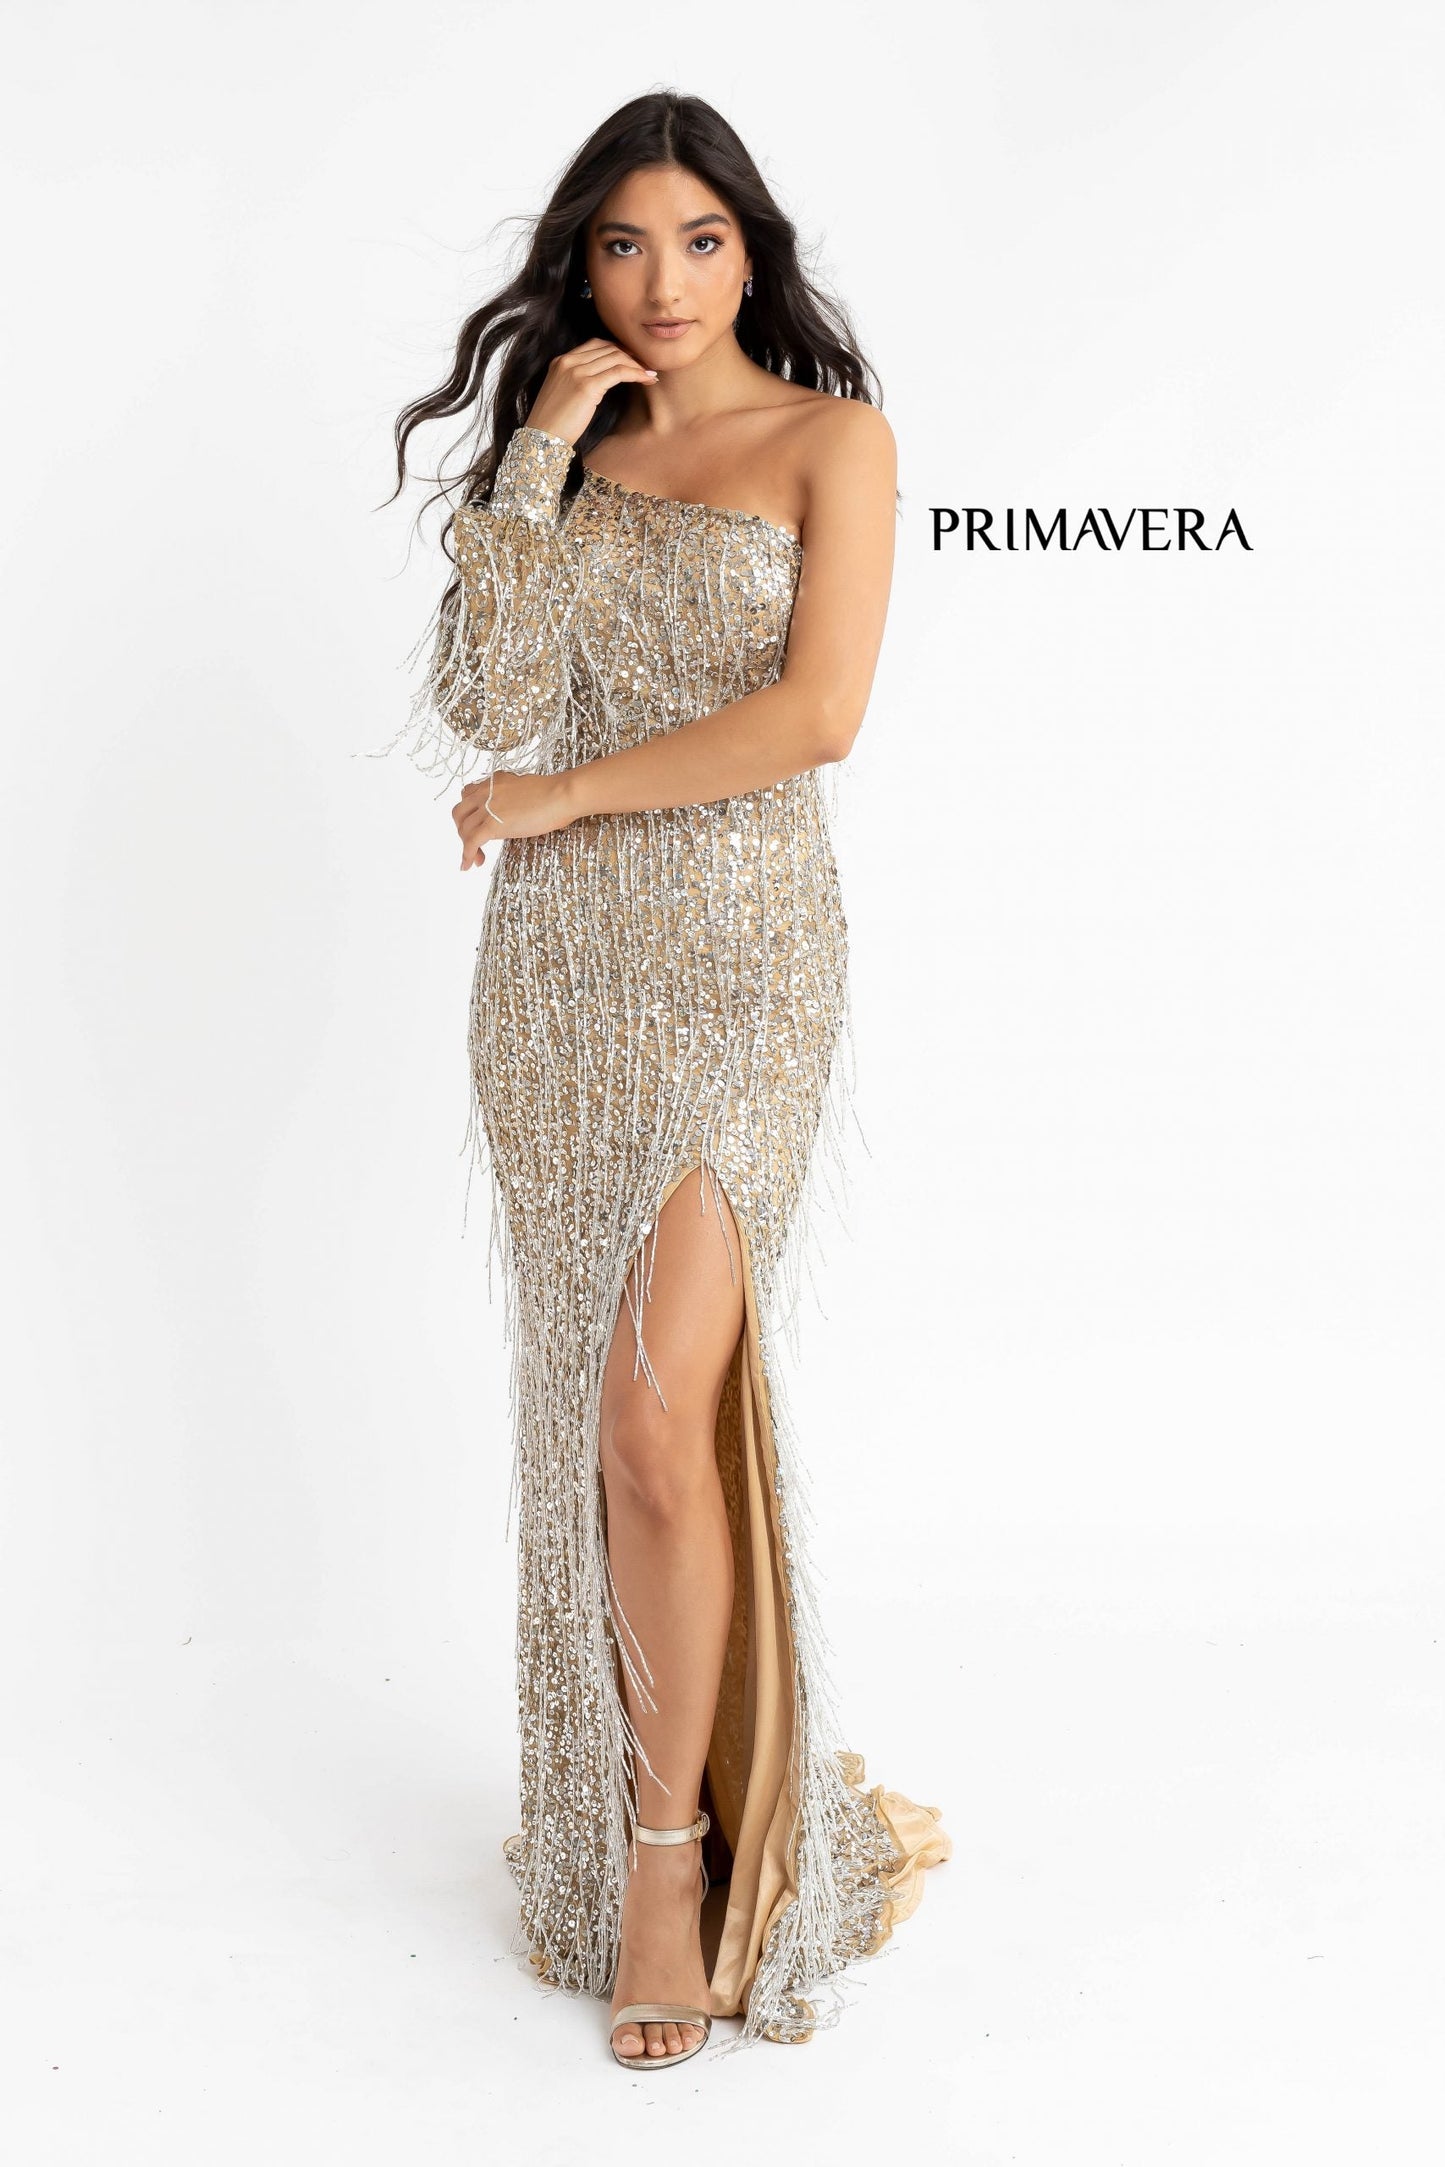 Primavera Couture 3739 Cuffed Sleeve Fringe Evening Prom Dress One Shoulder with Slit size 6 Powder Blue